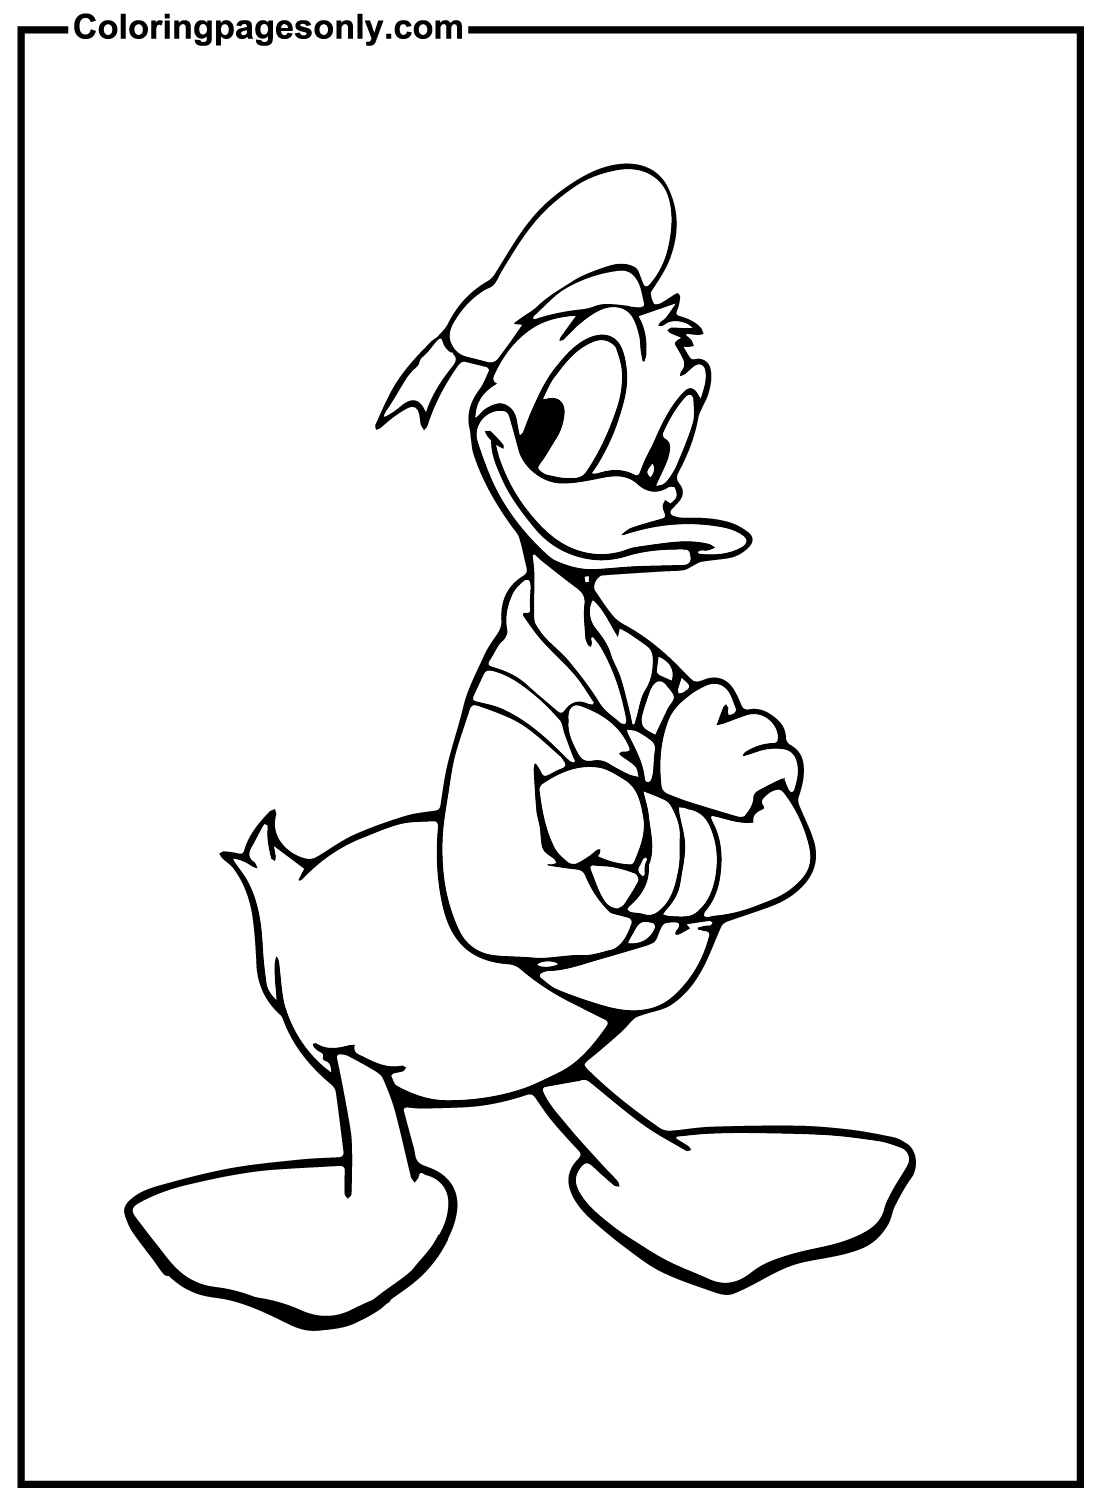 Cool Donald Duck Kingdom Hearts Coloring Page - Free Printable Coloring ...